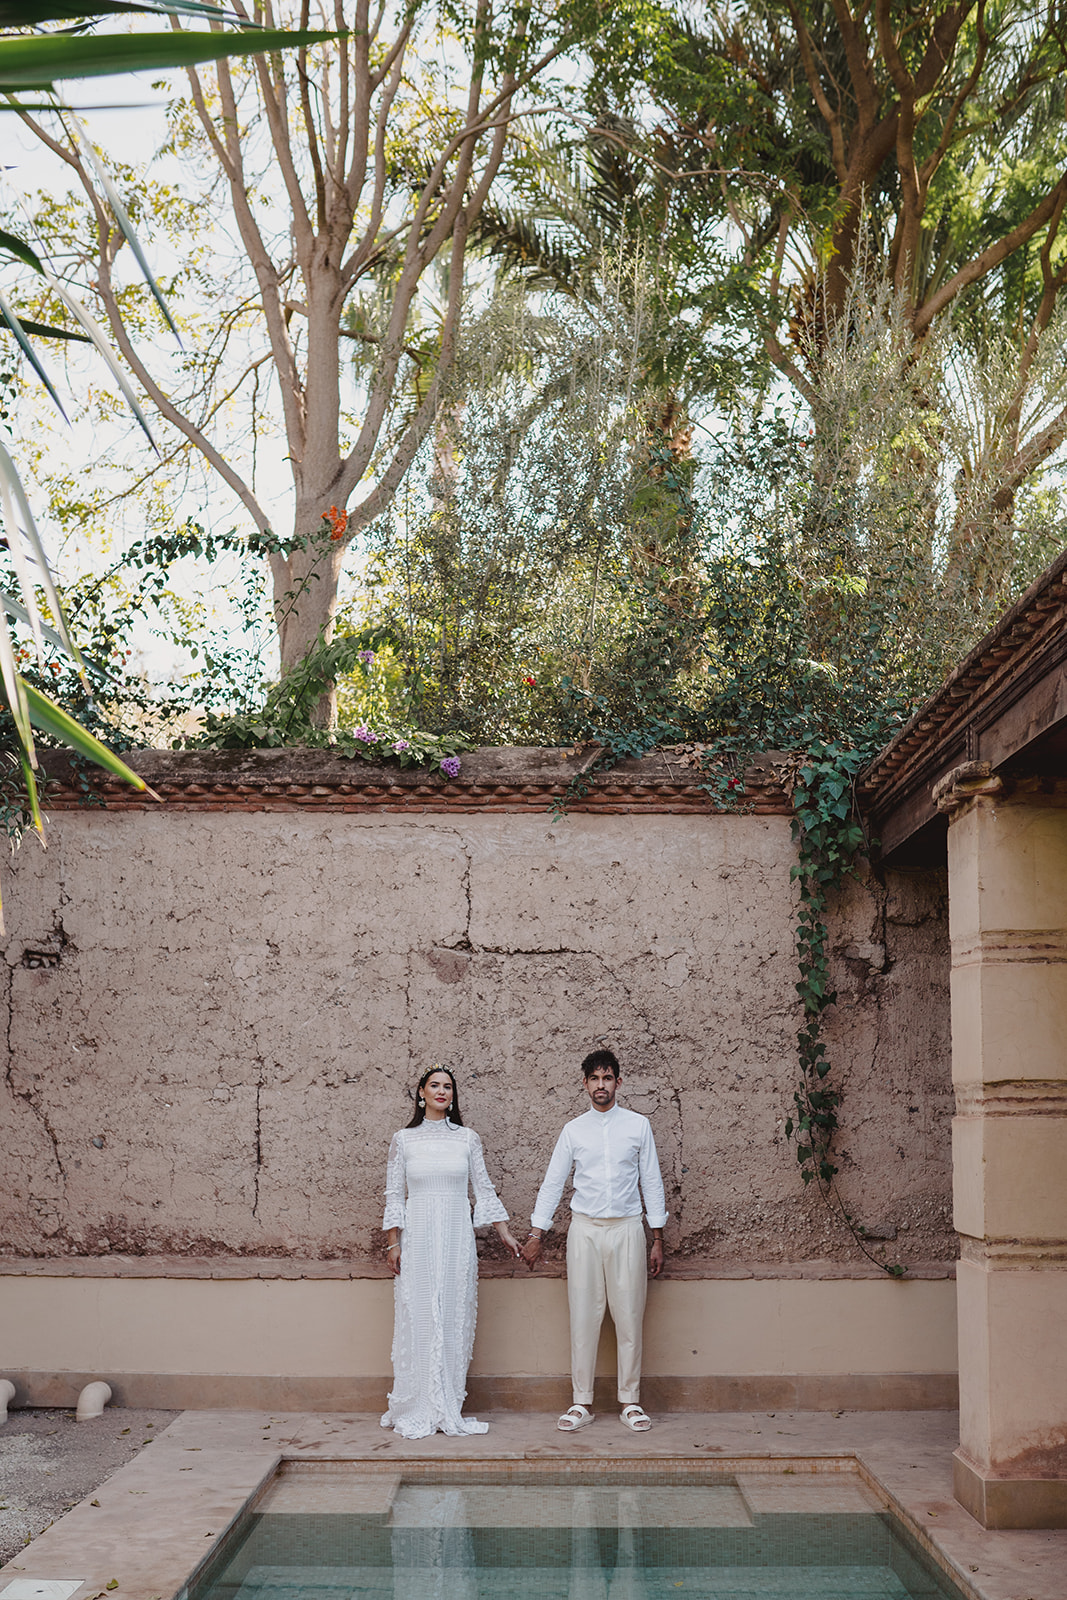 A couple who eloped in Marrakech stand by the pool in Les Deux Tours hotel